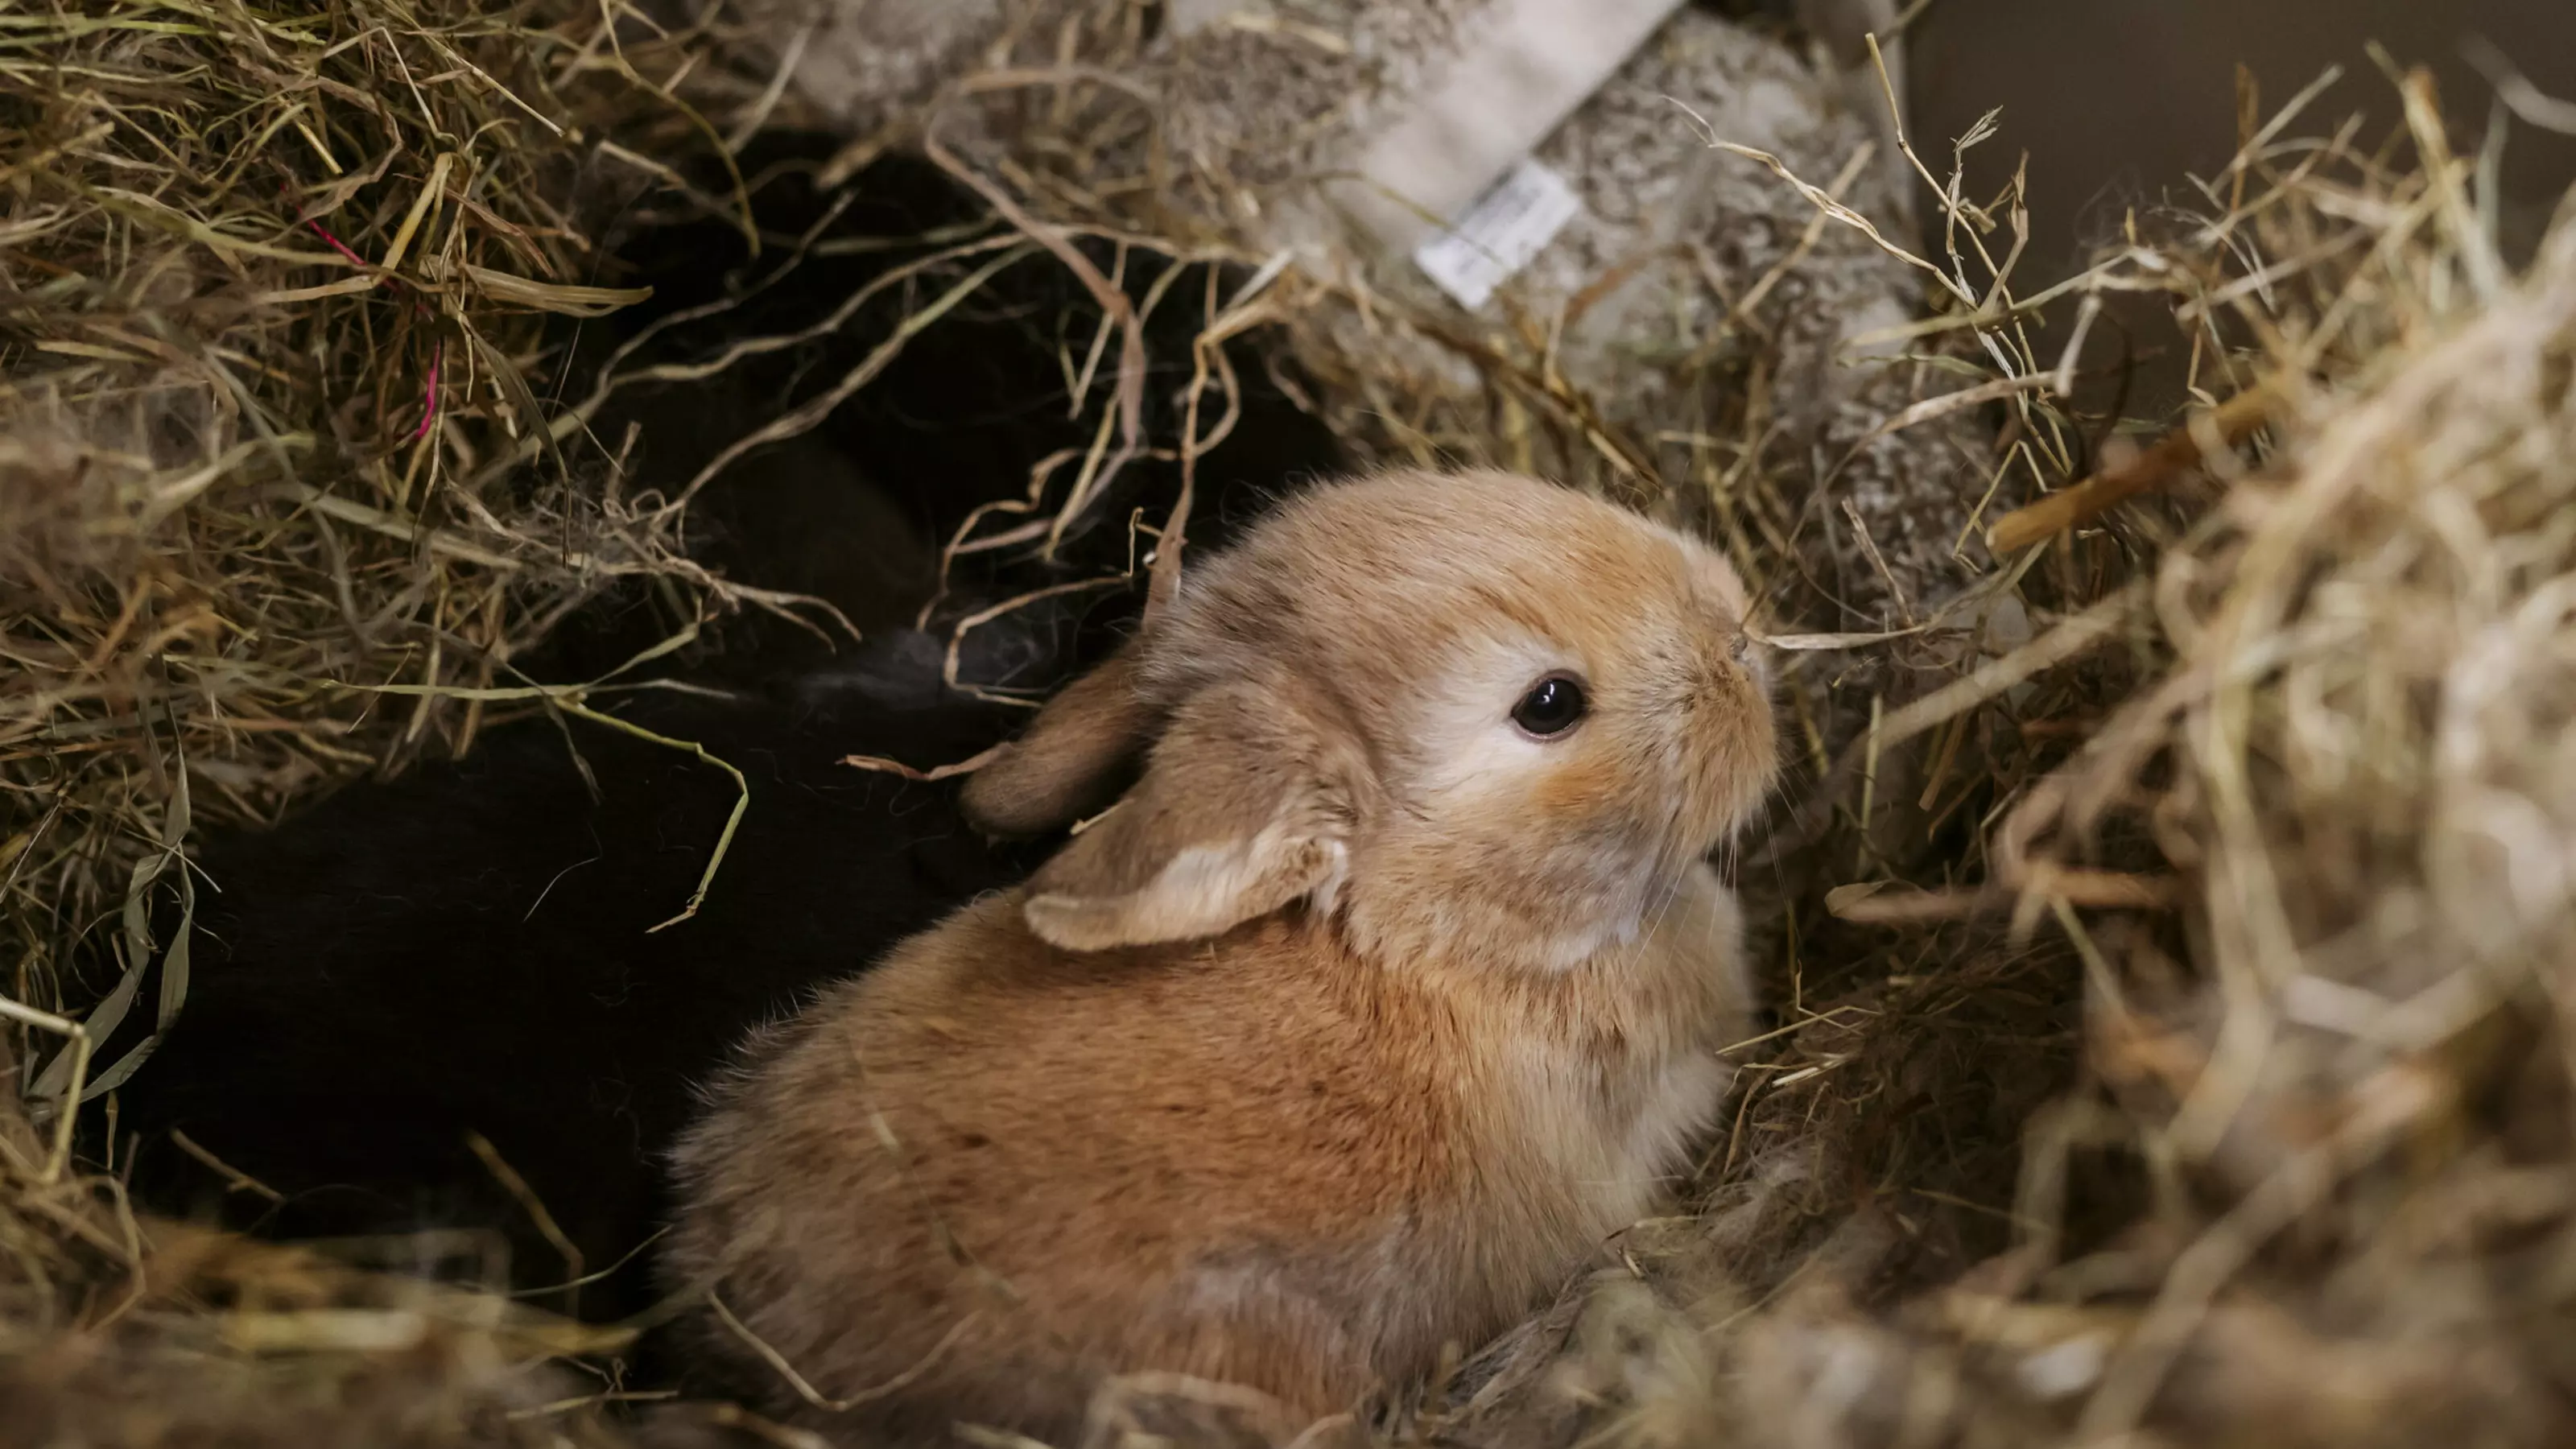 Golden coloured baby rabbit Prawn snuggles up in a comfy straw nest